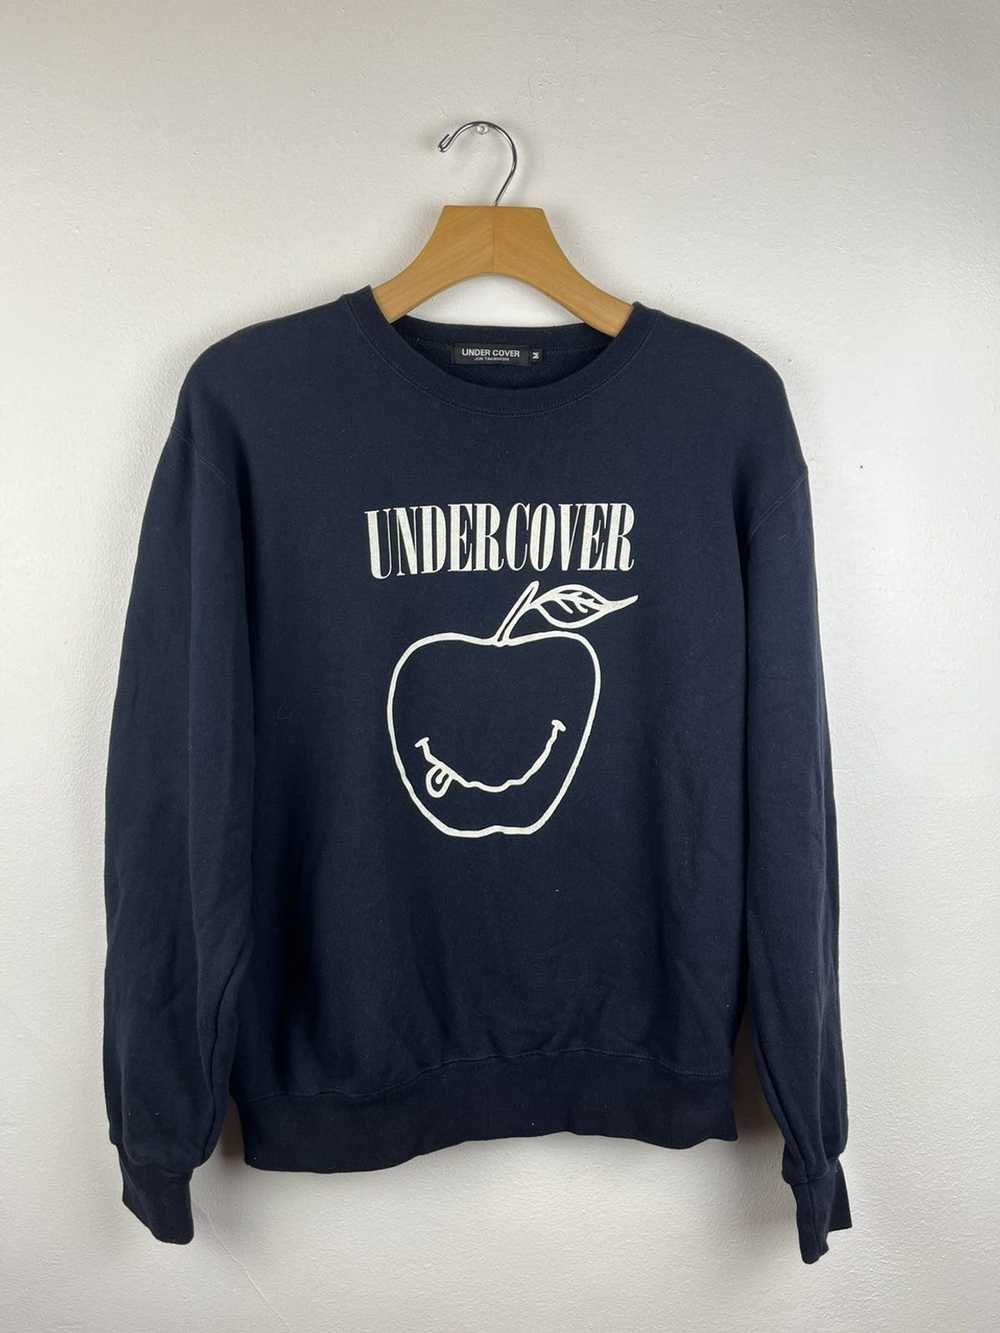 Undercover Undercover Nirvana Apple Sweater - image 1